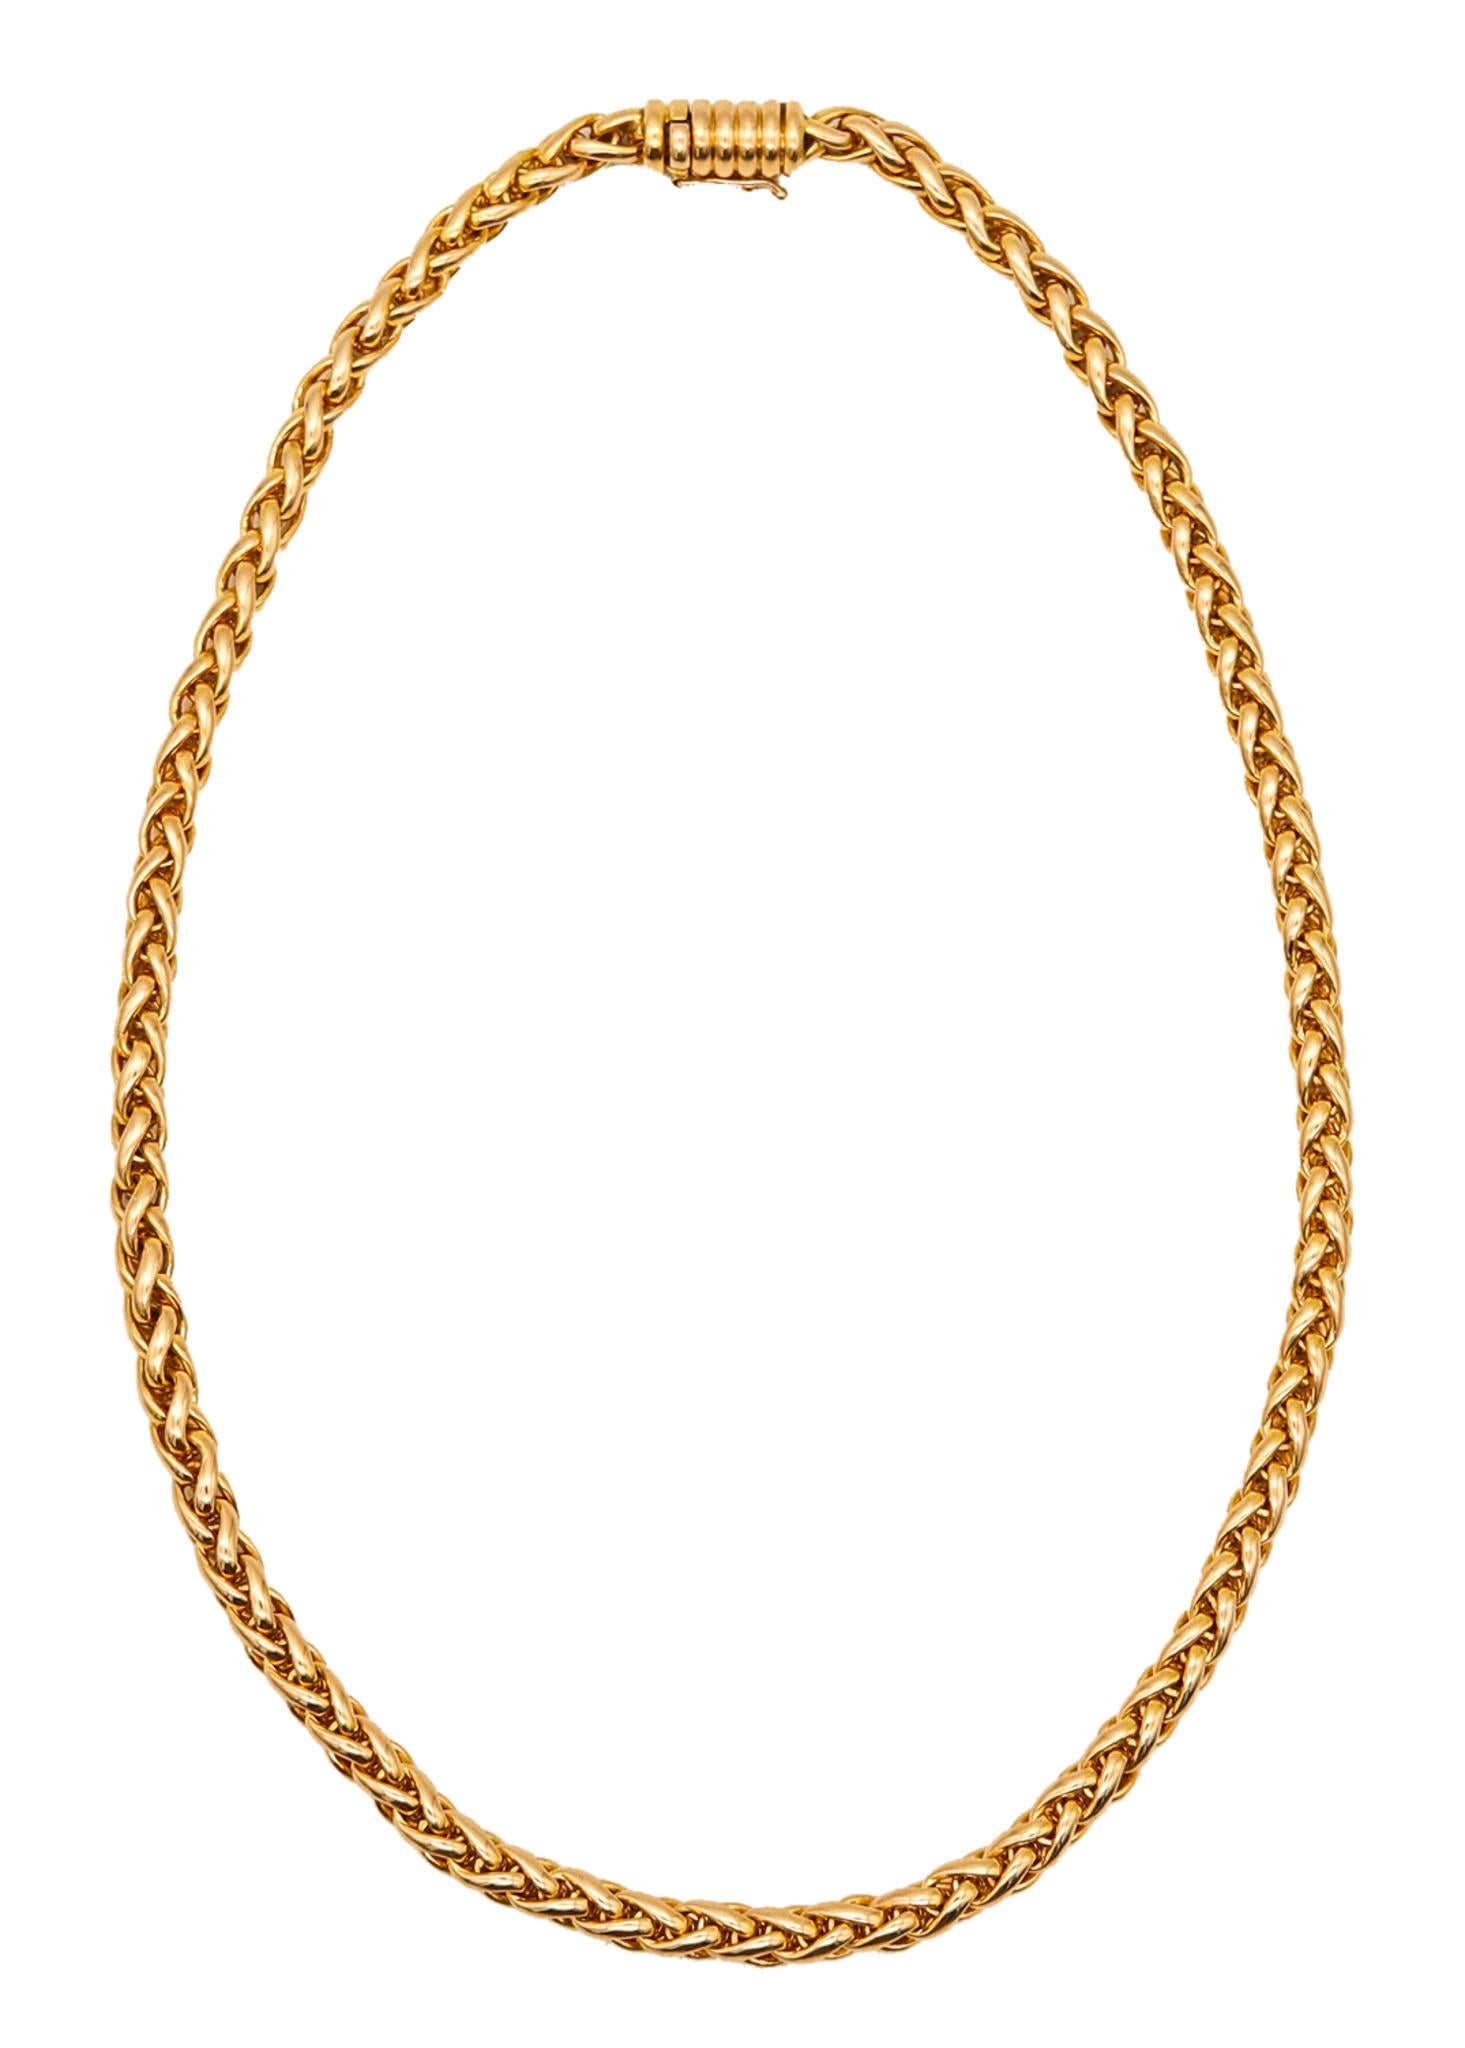 Cartier Paris Fabulous Necklace Chain In Solid 18Kt Yellow Gold With Red Pouch